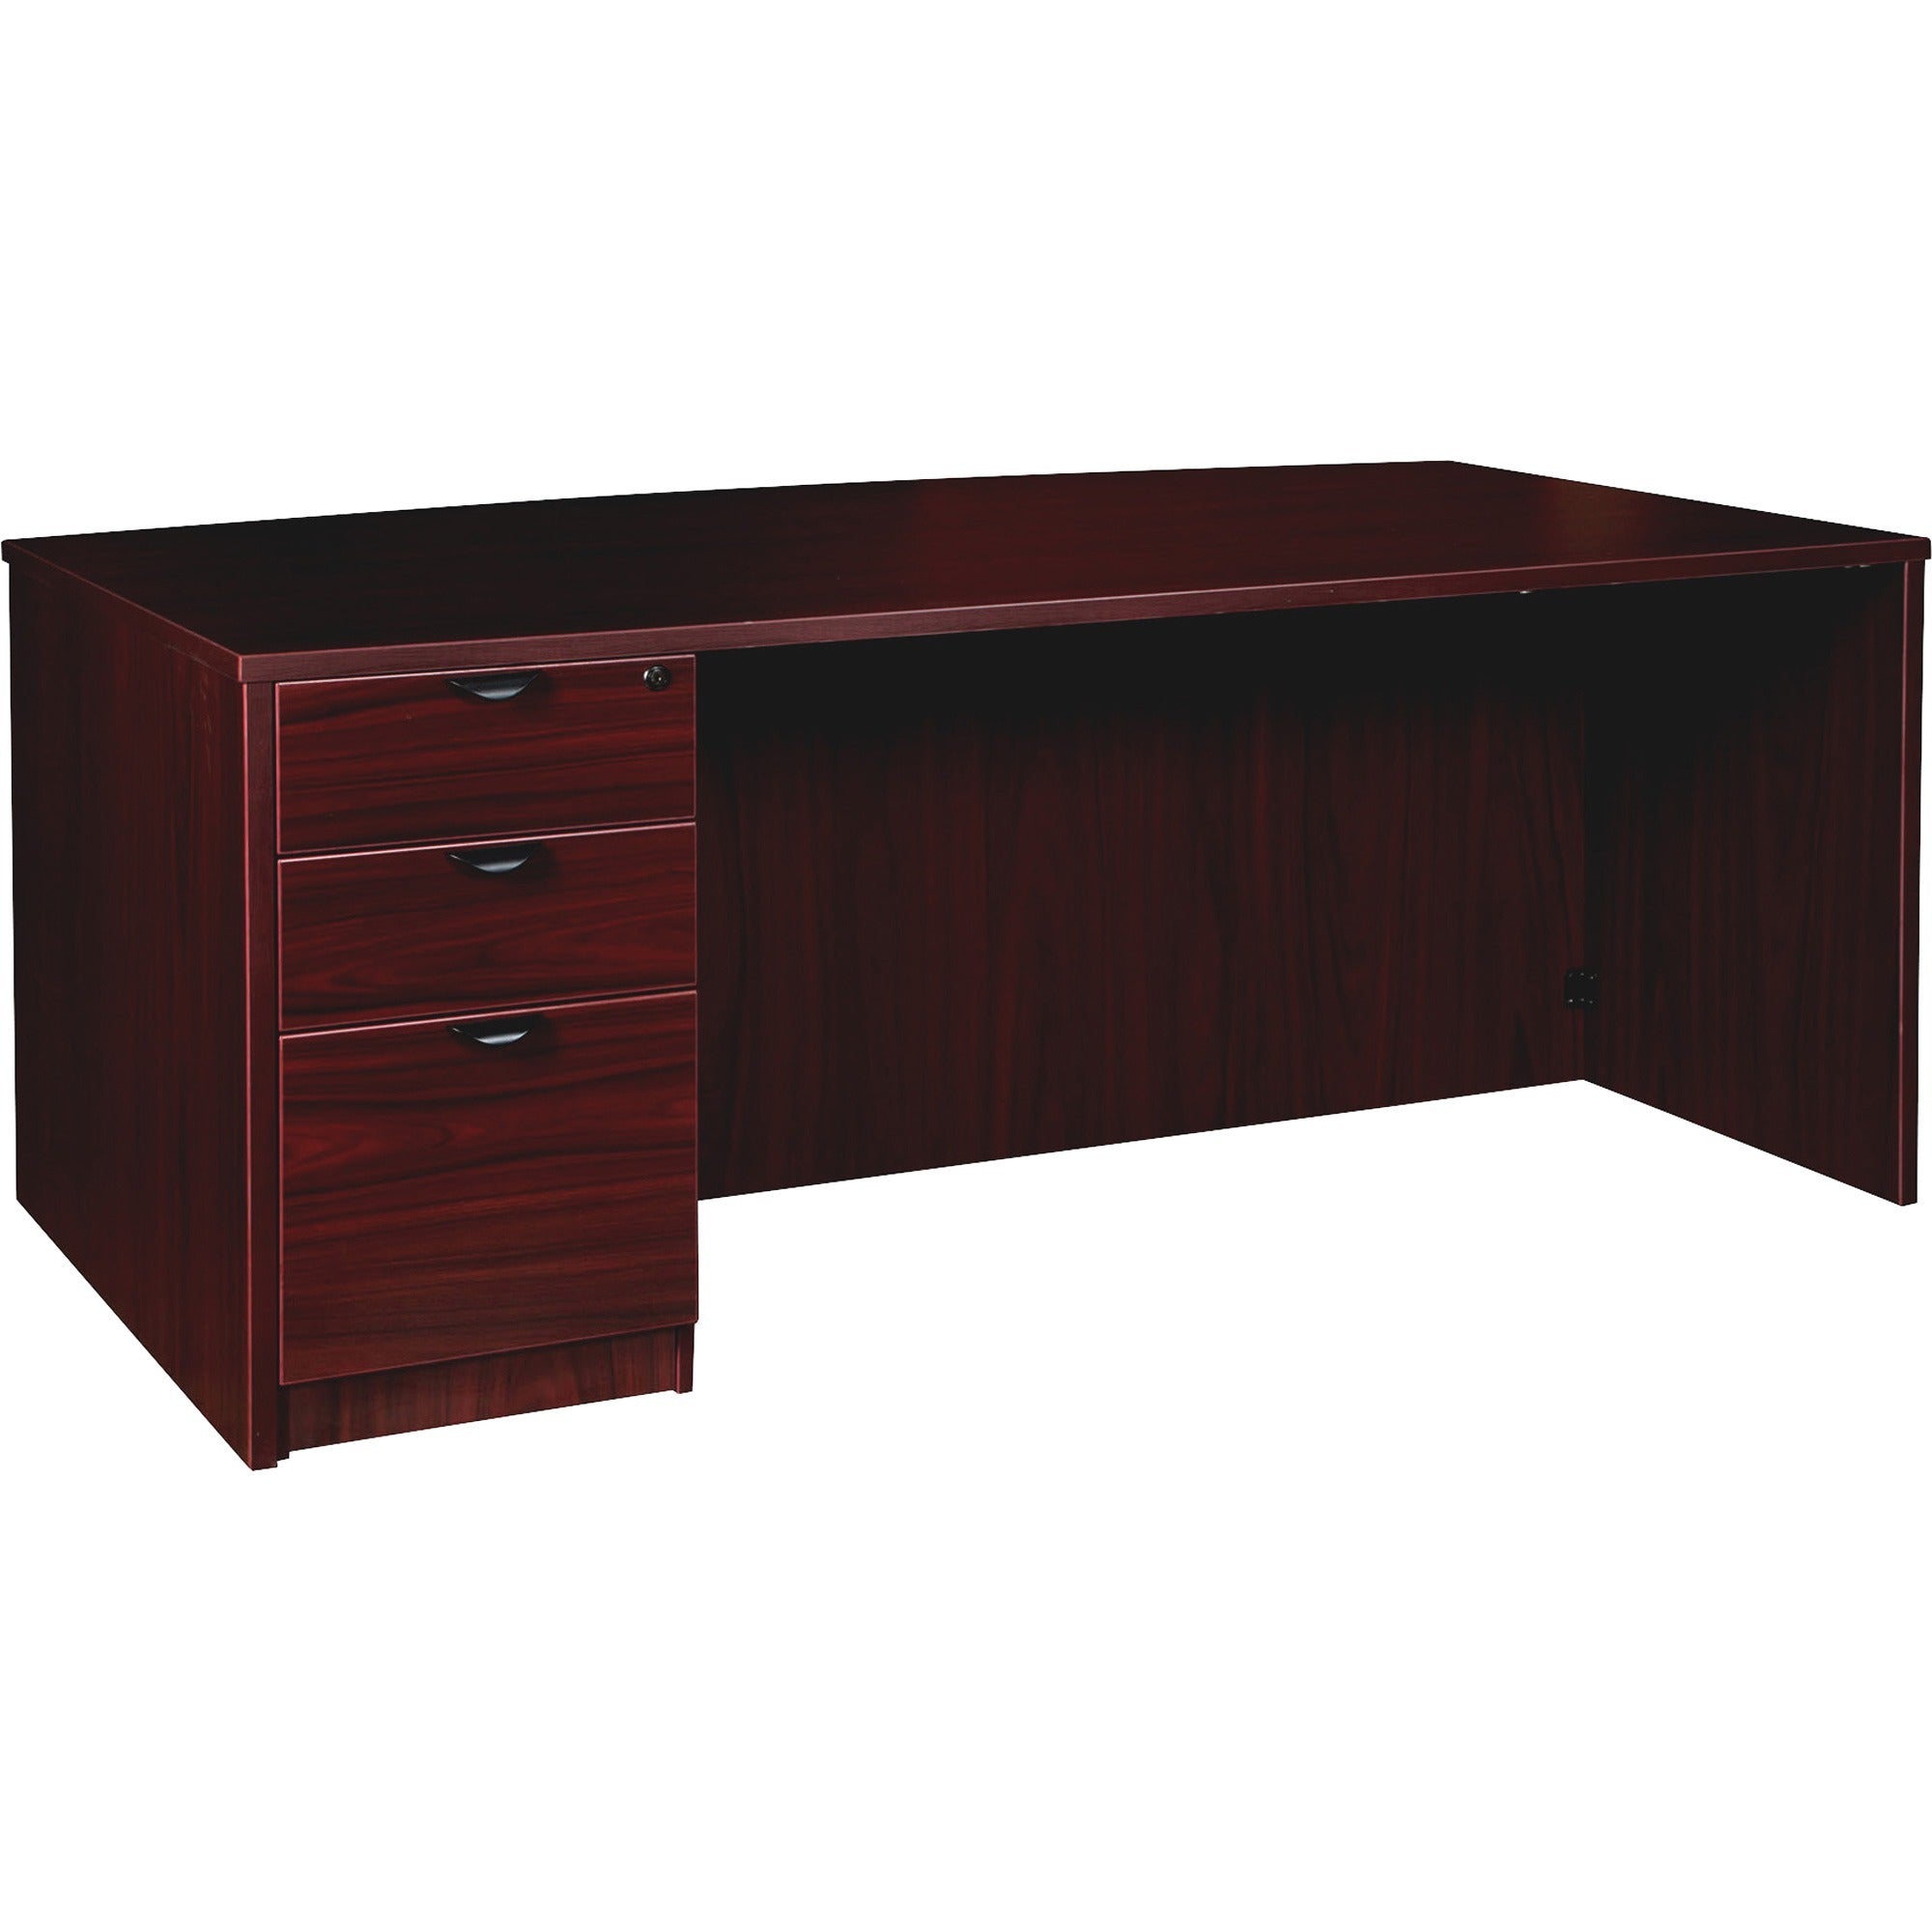 lorell-prominence-20-bowfront-left-pedestal-desk-1-top-72-x-4229-3-x-file-box-drawers-single-pedestal-on-left-side-band-edge-material-particleboard-finish-mahogany-laminate-thermofused-melamine-tfm_llrpd4272lspbmy - 1